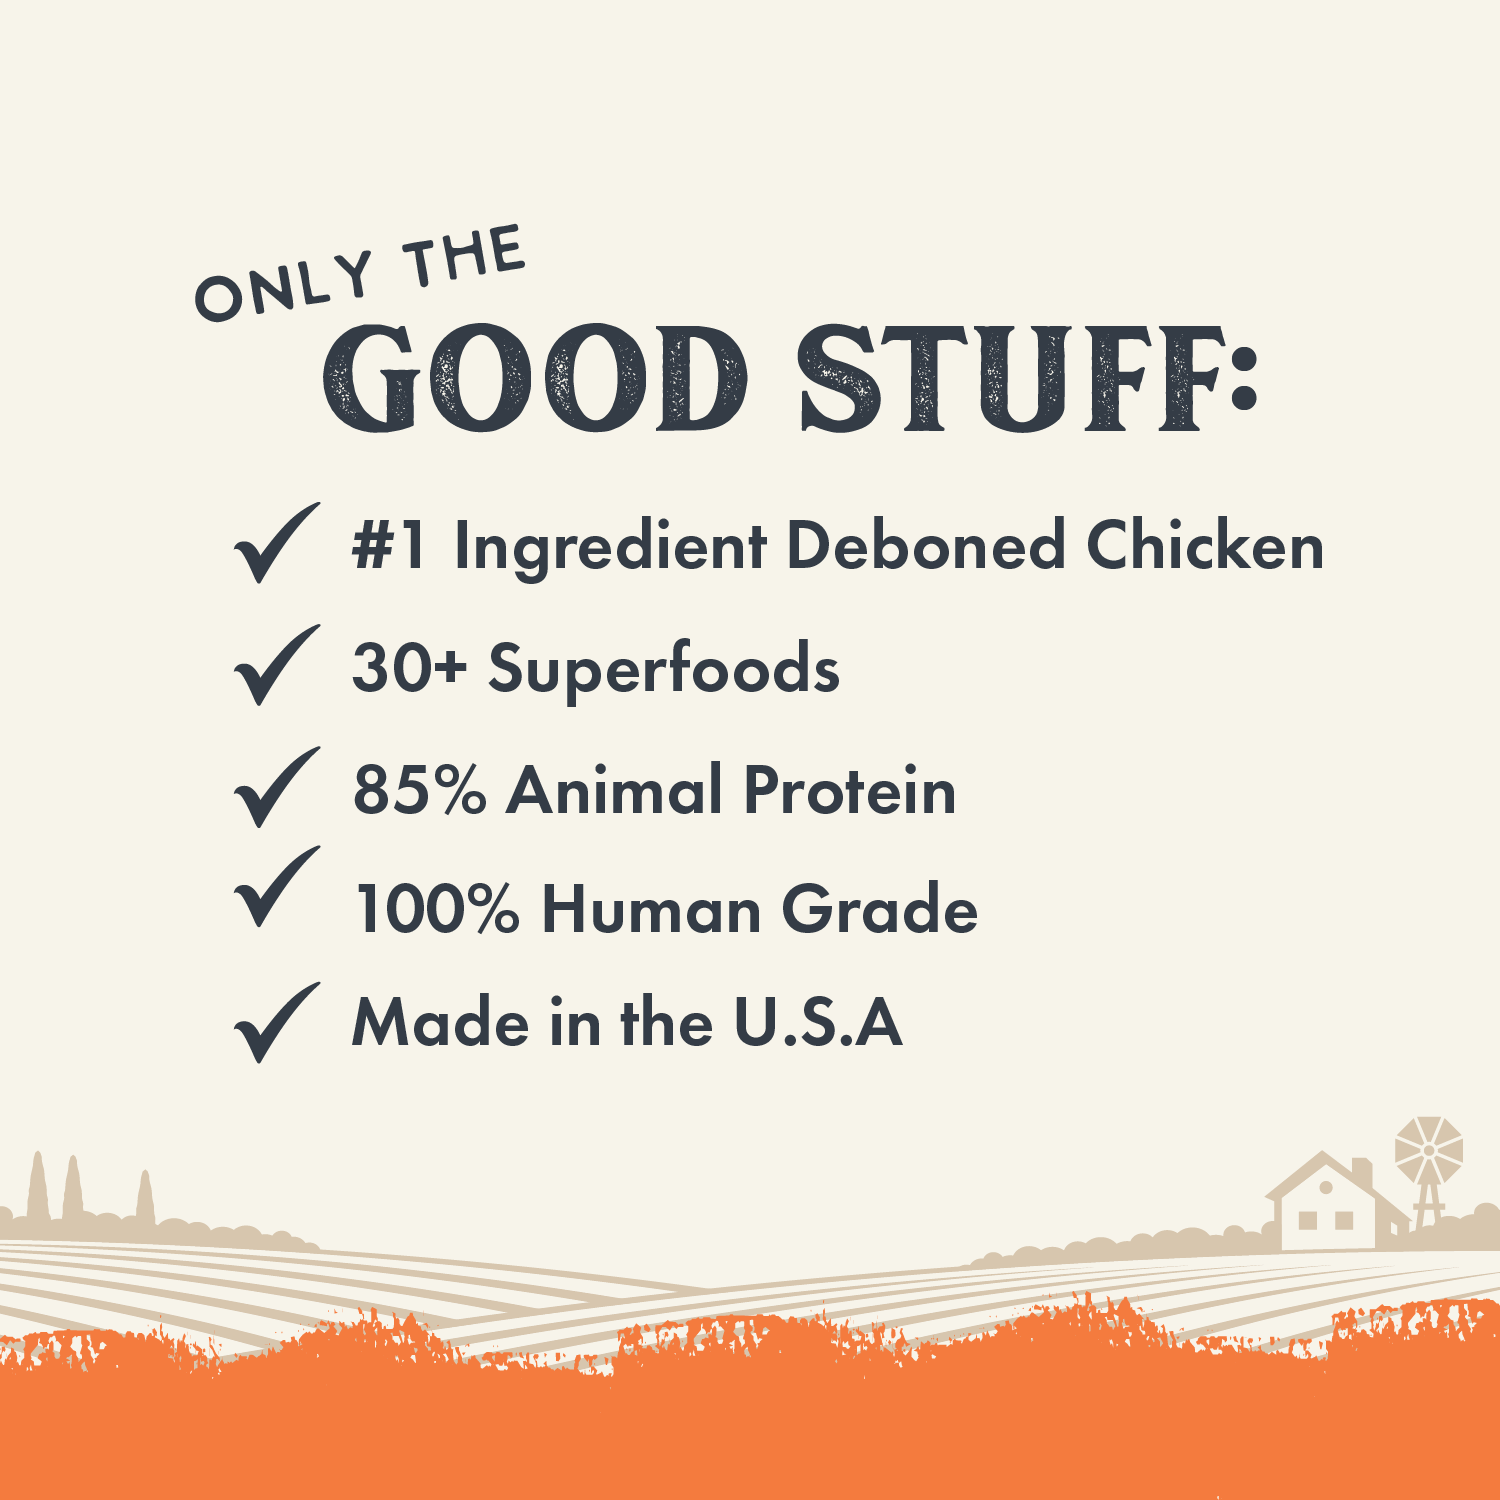 Infographic for Air Dried dog food listing benefits: #1 Ingredient Deboned Chicken, over 30 Superfoods, 85% Animal Protein, 100% Human Grade, and Made in the U.S.A.